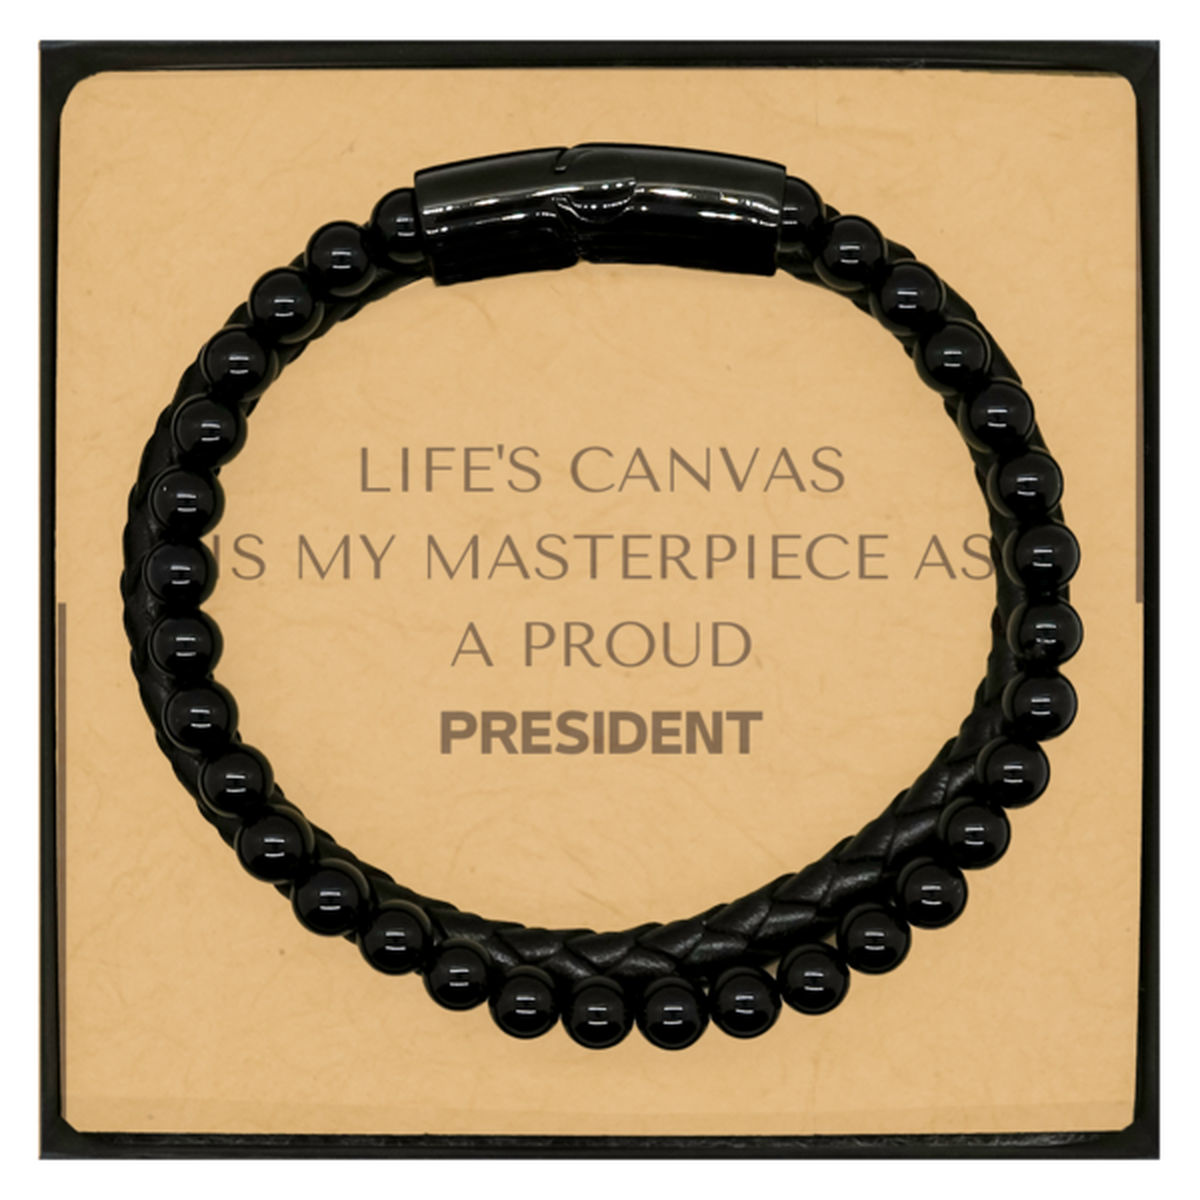 Proud President Gifts, Life's canvas is my masterpiece, Epic Birthday Christmas Unique Stone Leather Bracelets For President, Coworkers, Men, Women, Friends